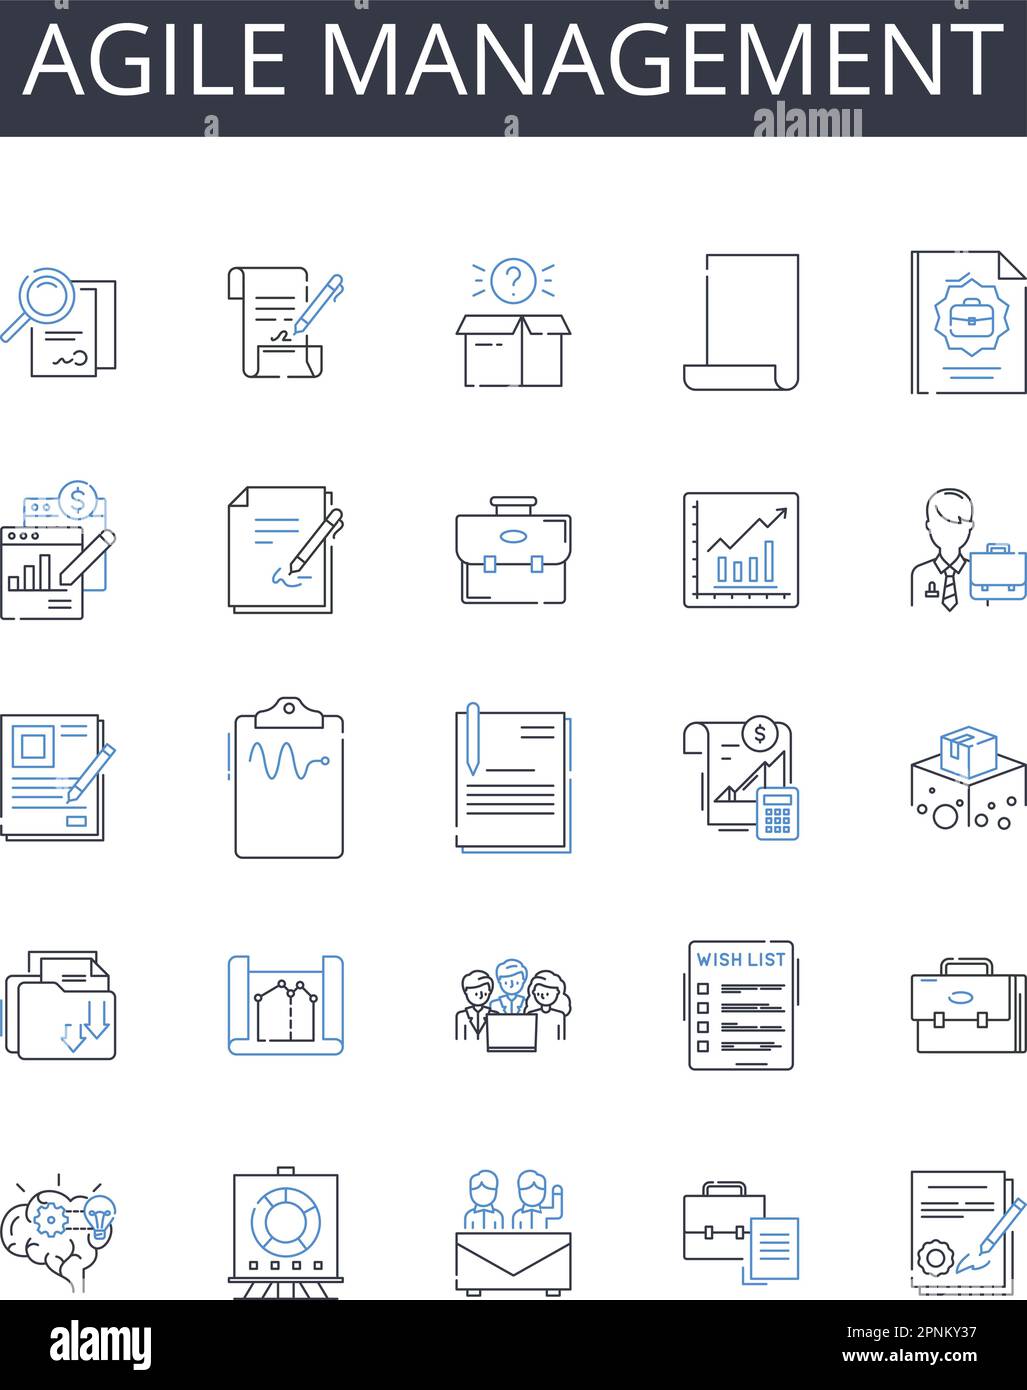 Agile management line icons collection. Lean leadership, Dynamic planning, Adaptive strategy, Proactive approach, Integrated teamwork, Creative Stock Vector